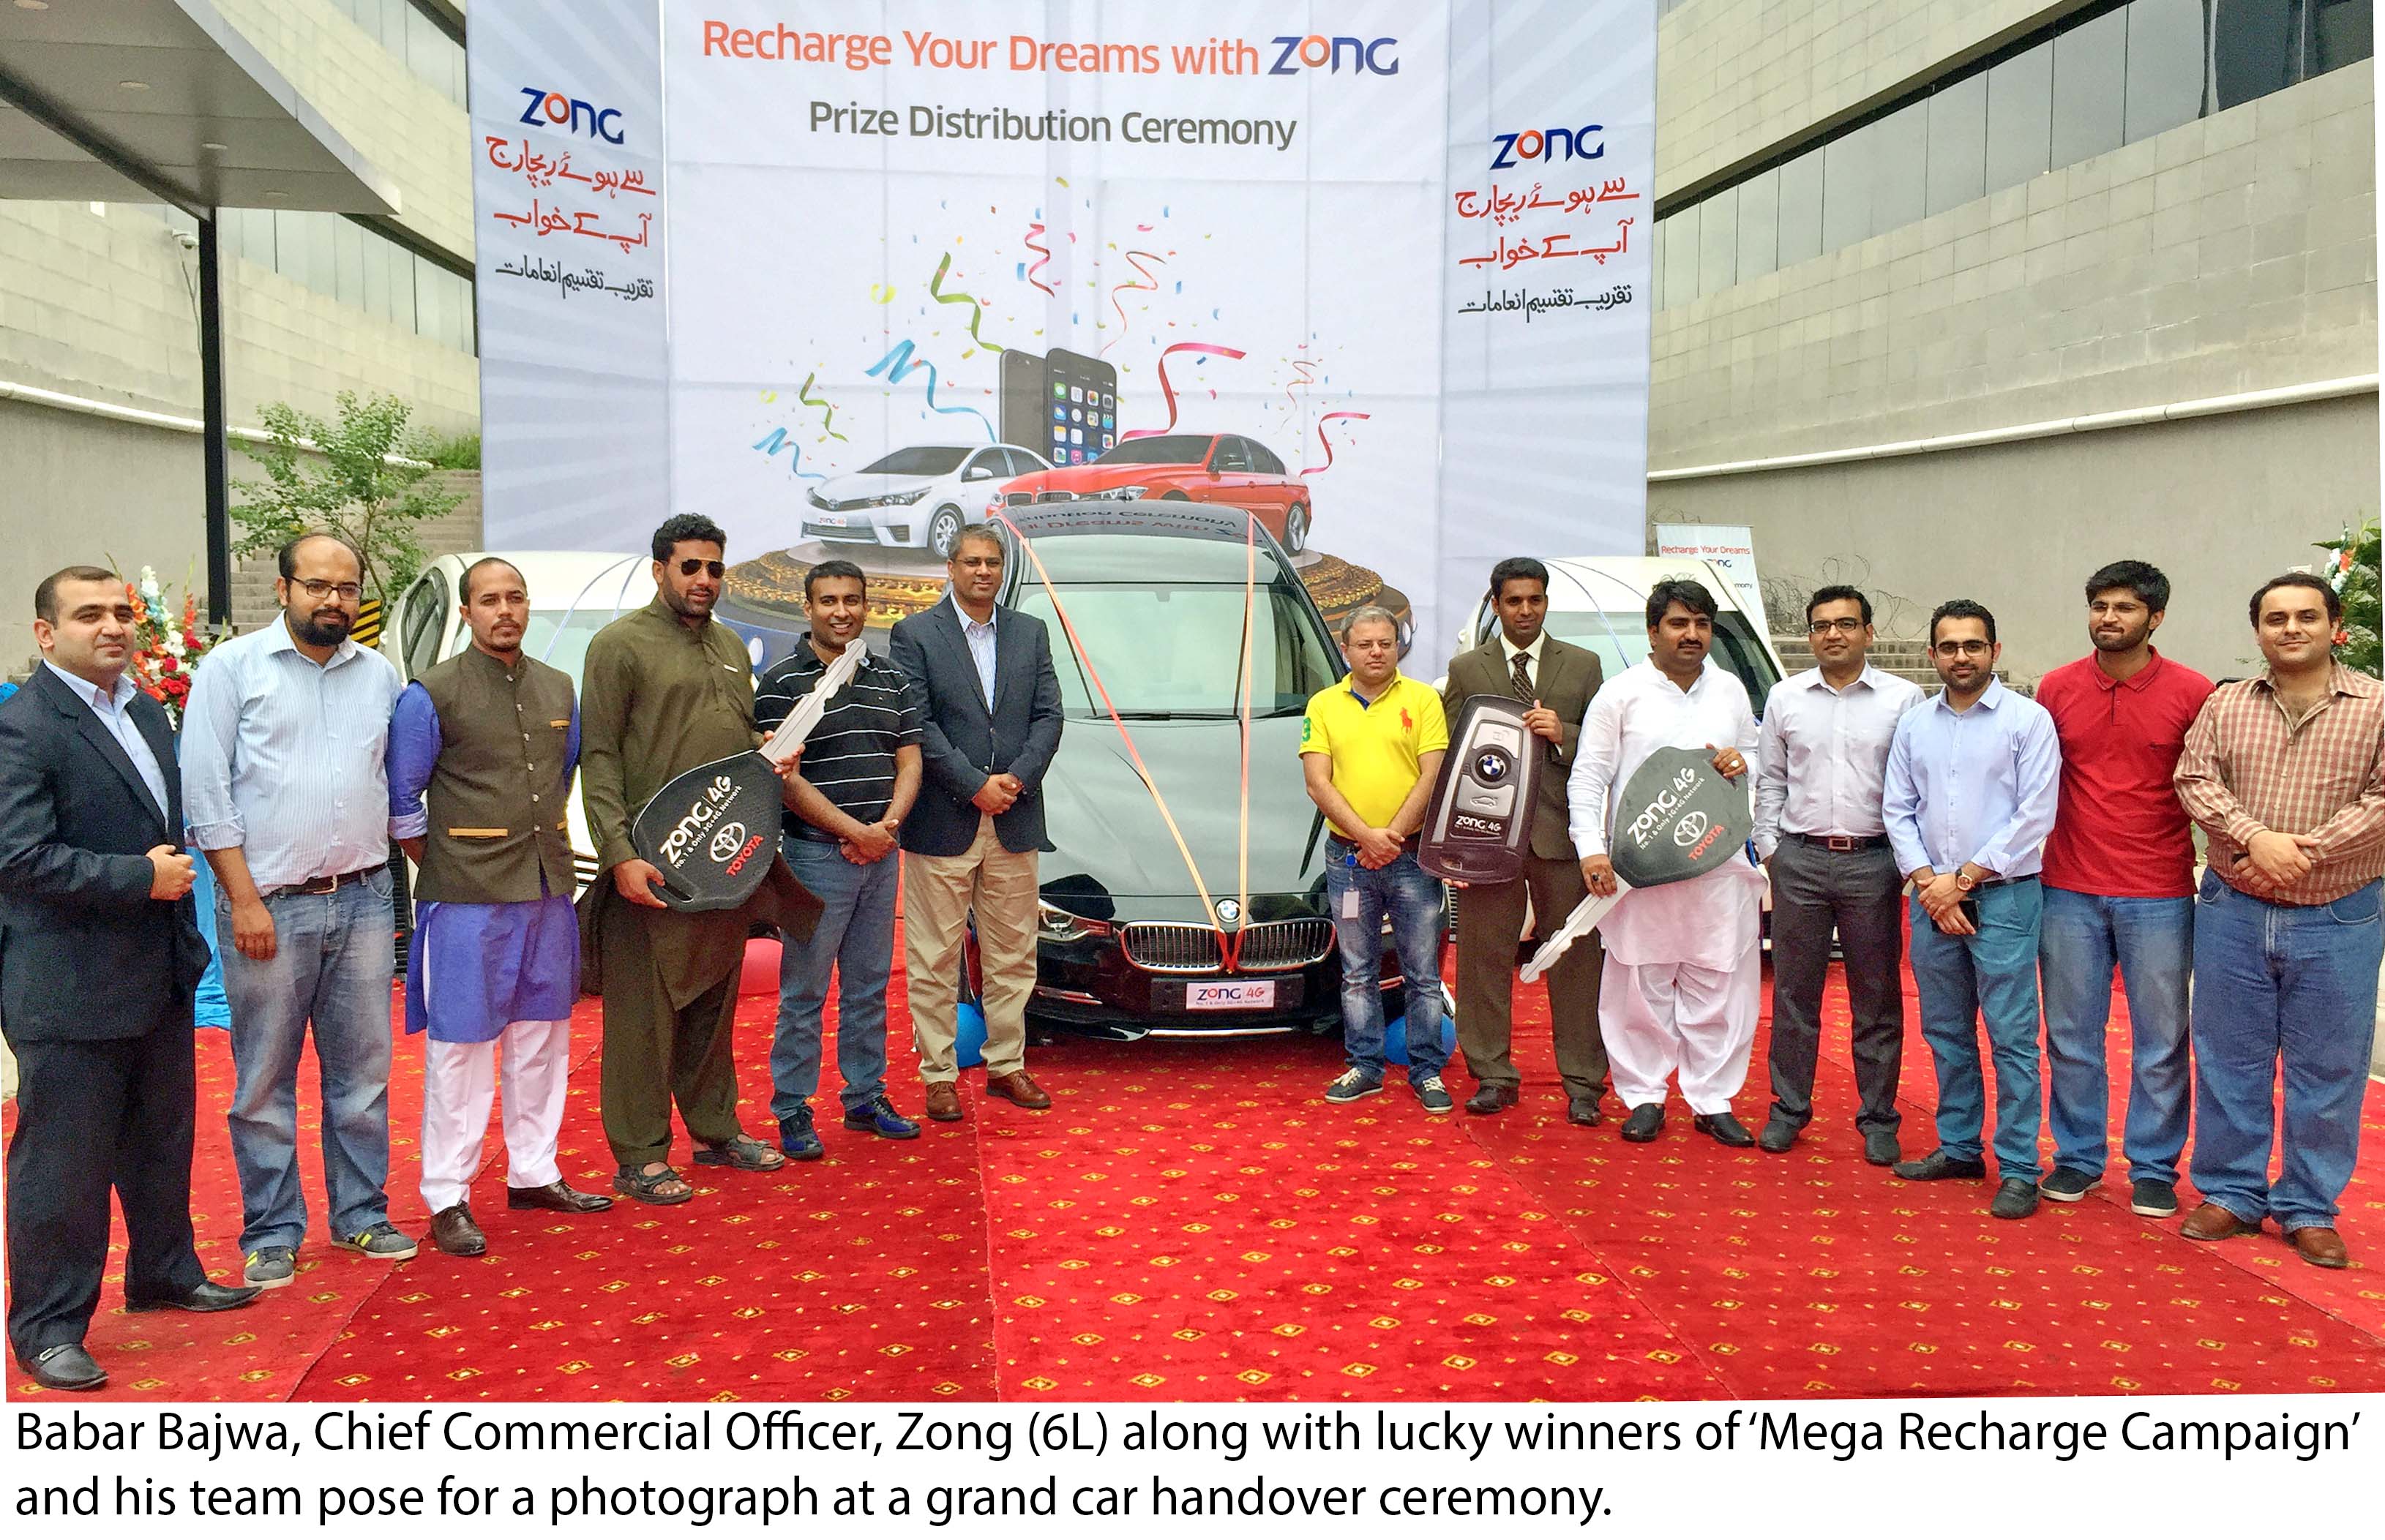 Zong handovers a brand new BMW and two Toyota Corolla cars